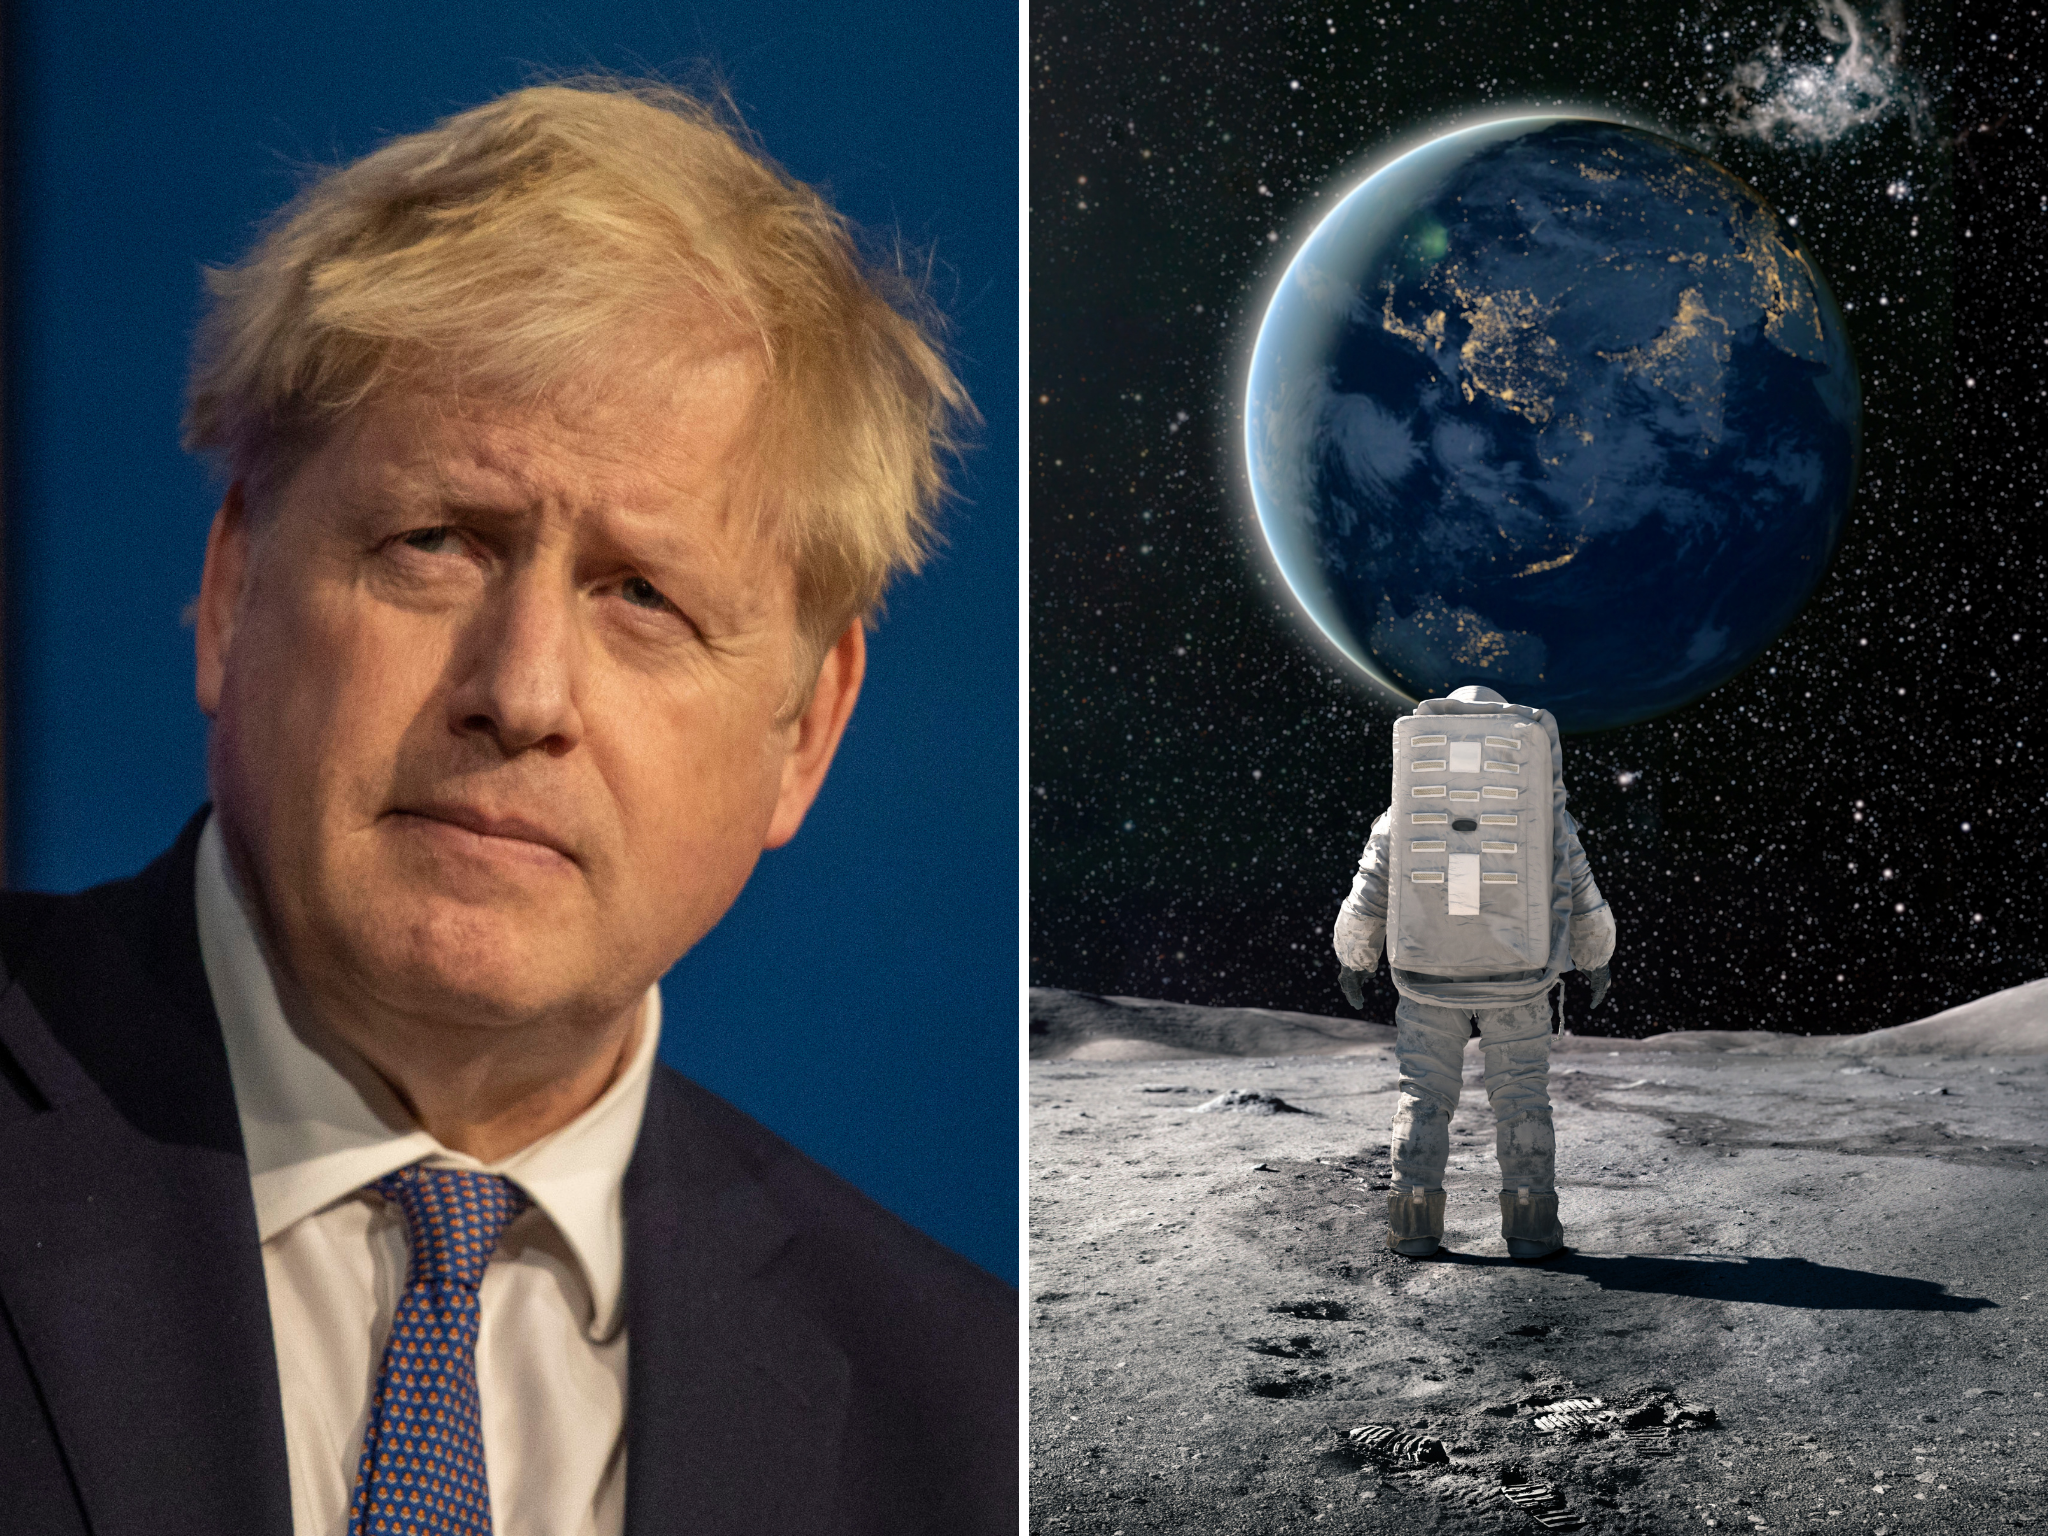 More people think moon landings were faked than the number who believe PM is telling the truth about parties